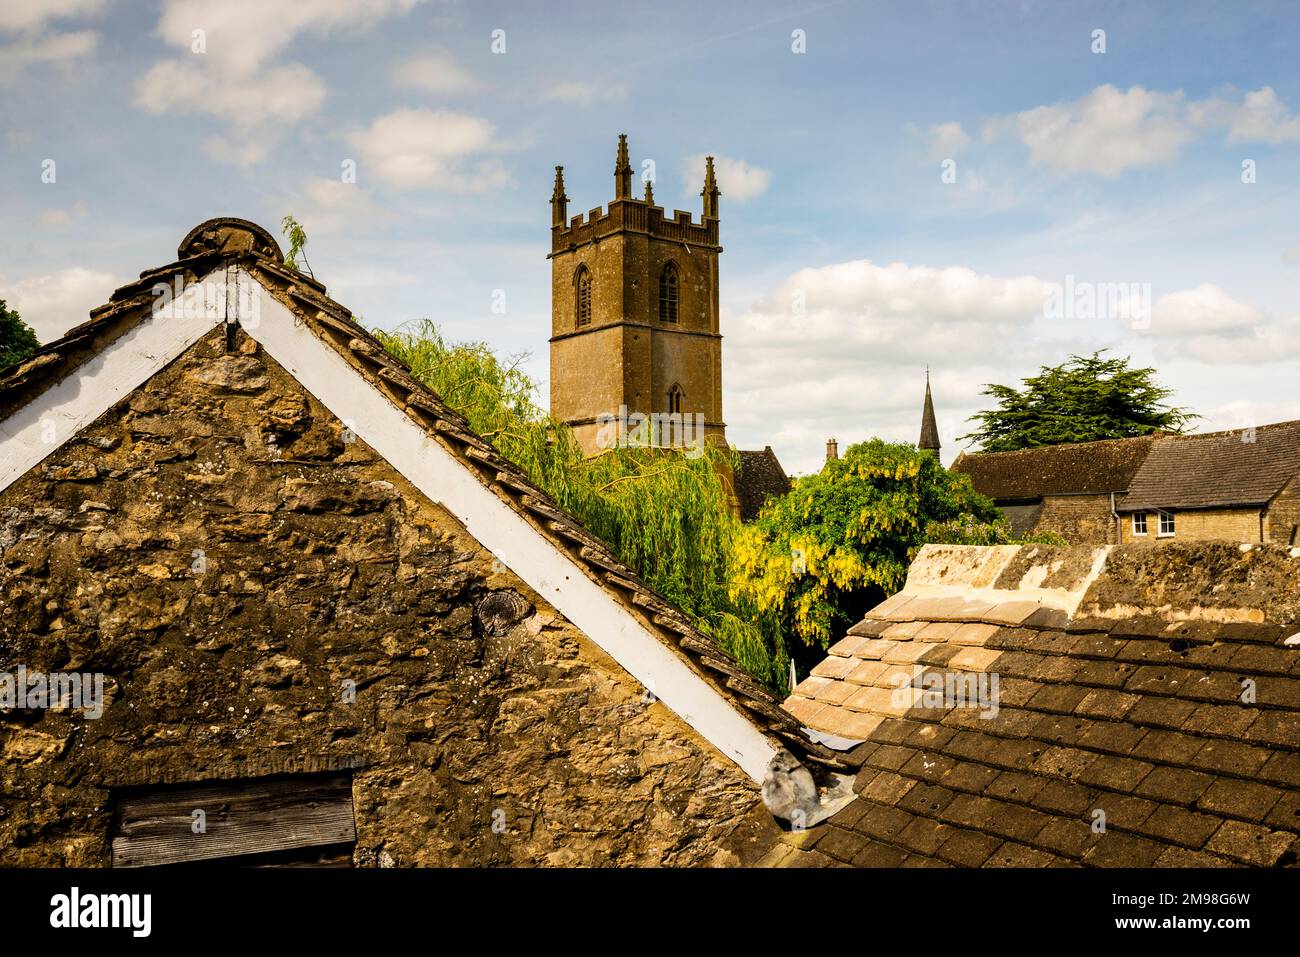 Tower of St Edwards Church in Stow-on-the-Wold, Cotswold District of England. Stockfoto